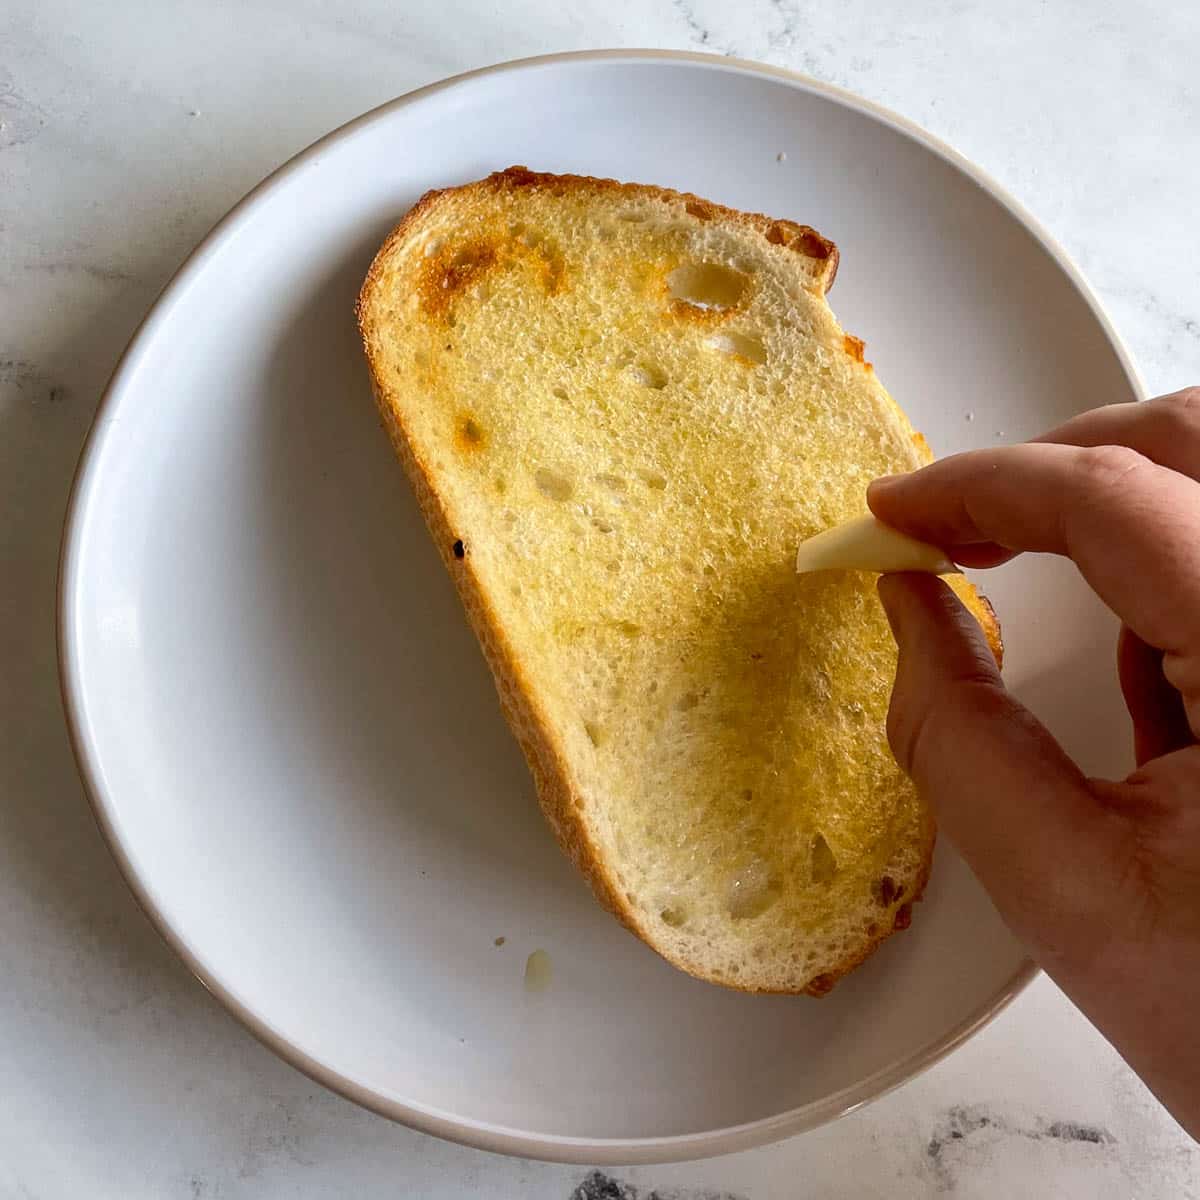 A piece of toasted bread is rubbed with a clove of garlic.